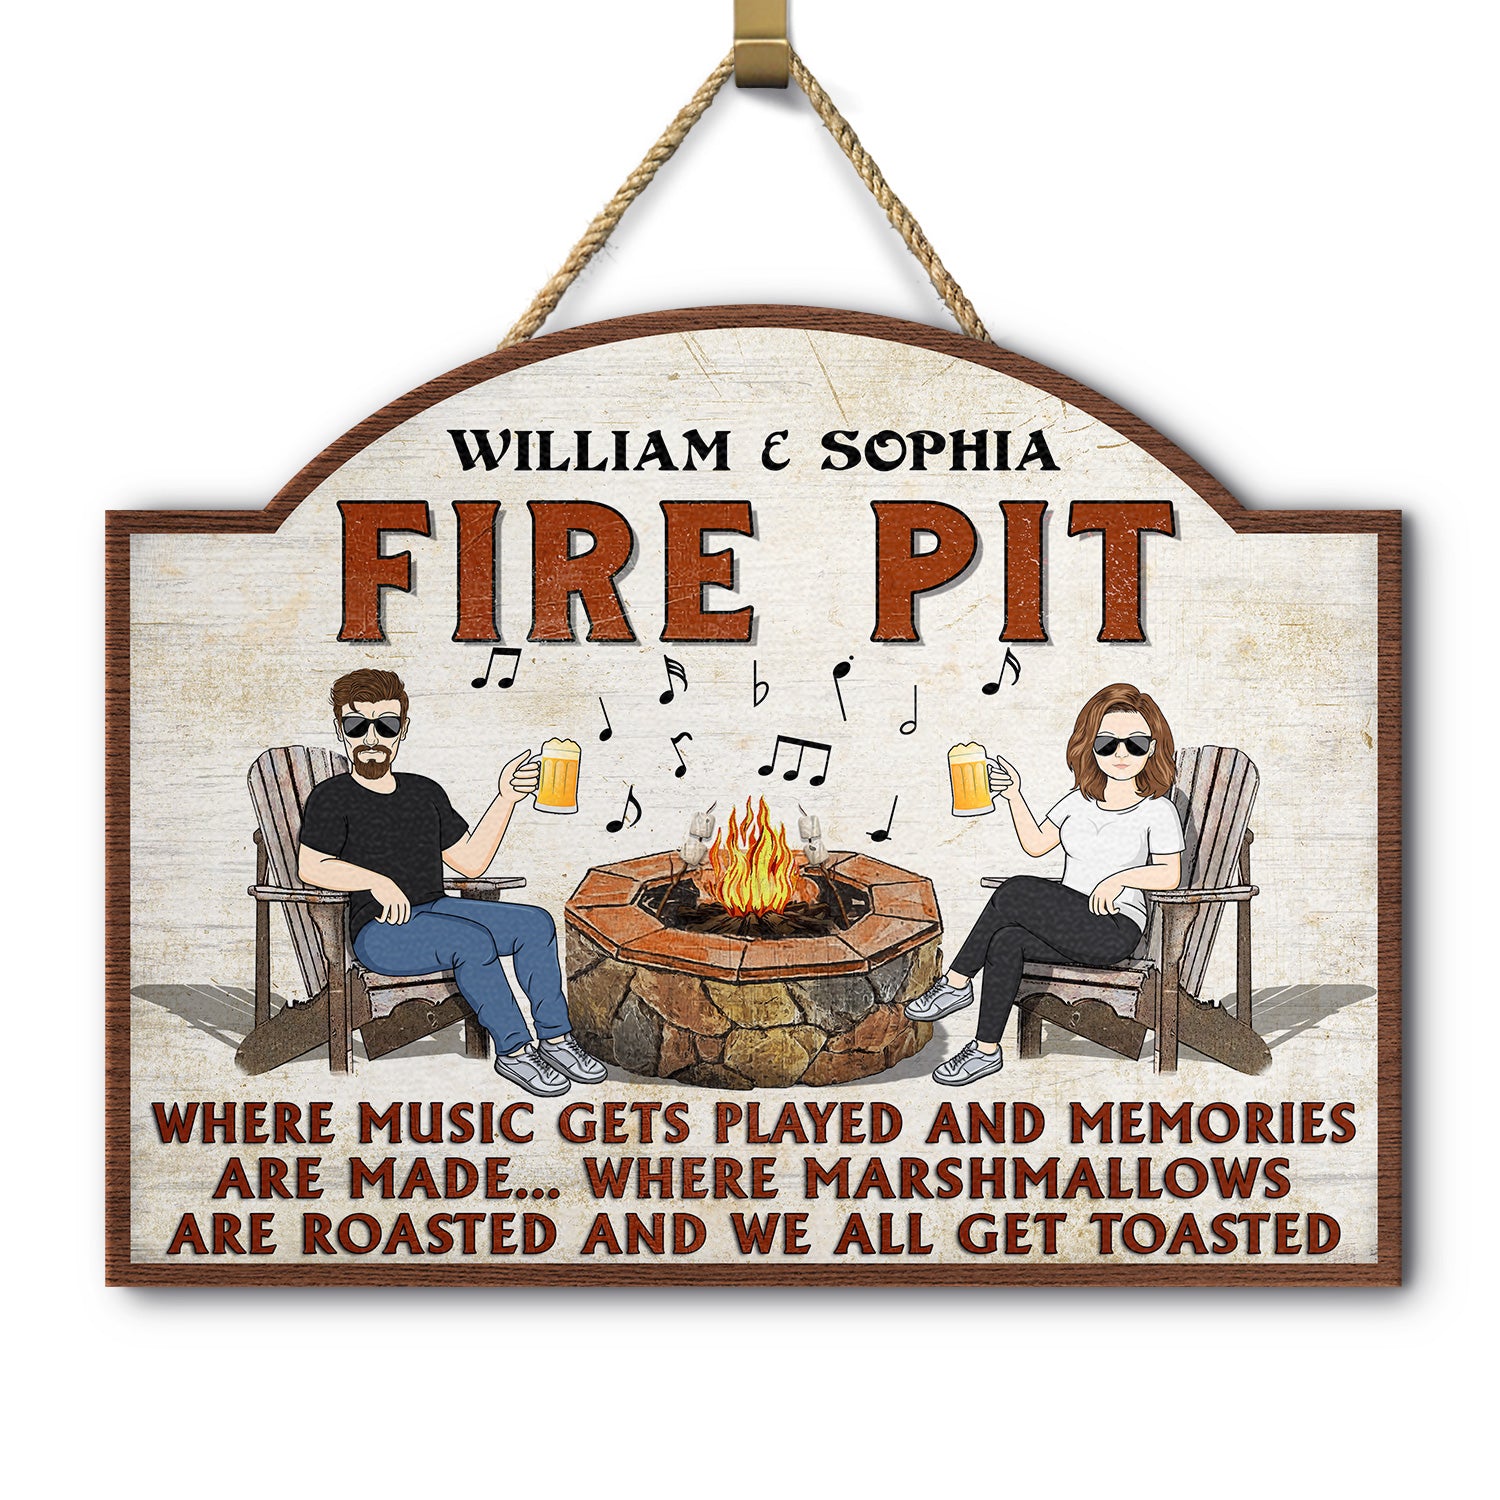 Camping Fire Pit Where Music Gets Played - Home Decor, Backyard Decor, Gift For Her, Him, Family, Couples, Husband, Wife - Personalized Custom Shaped Wood Sign